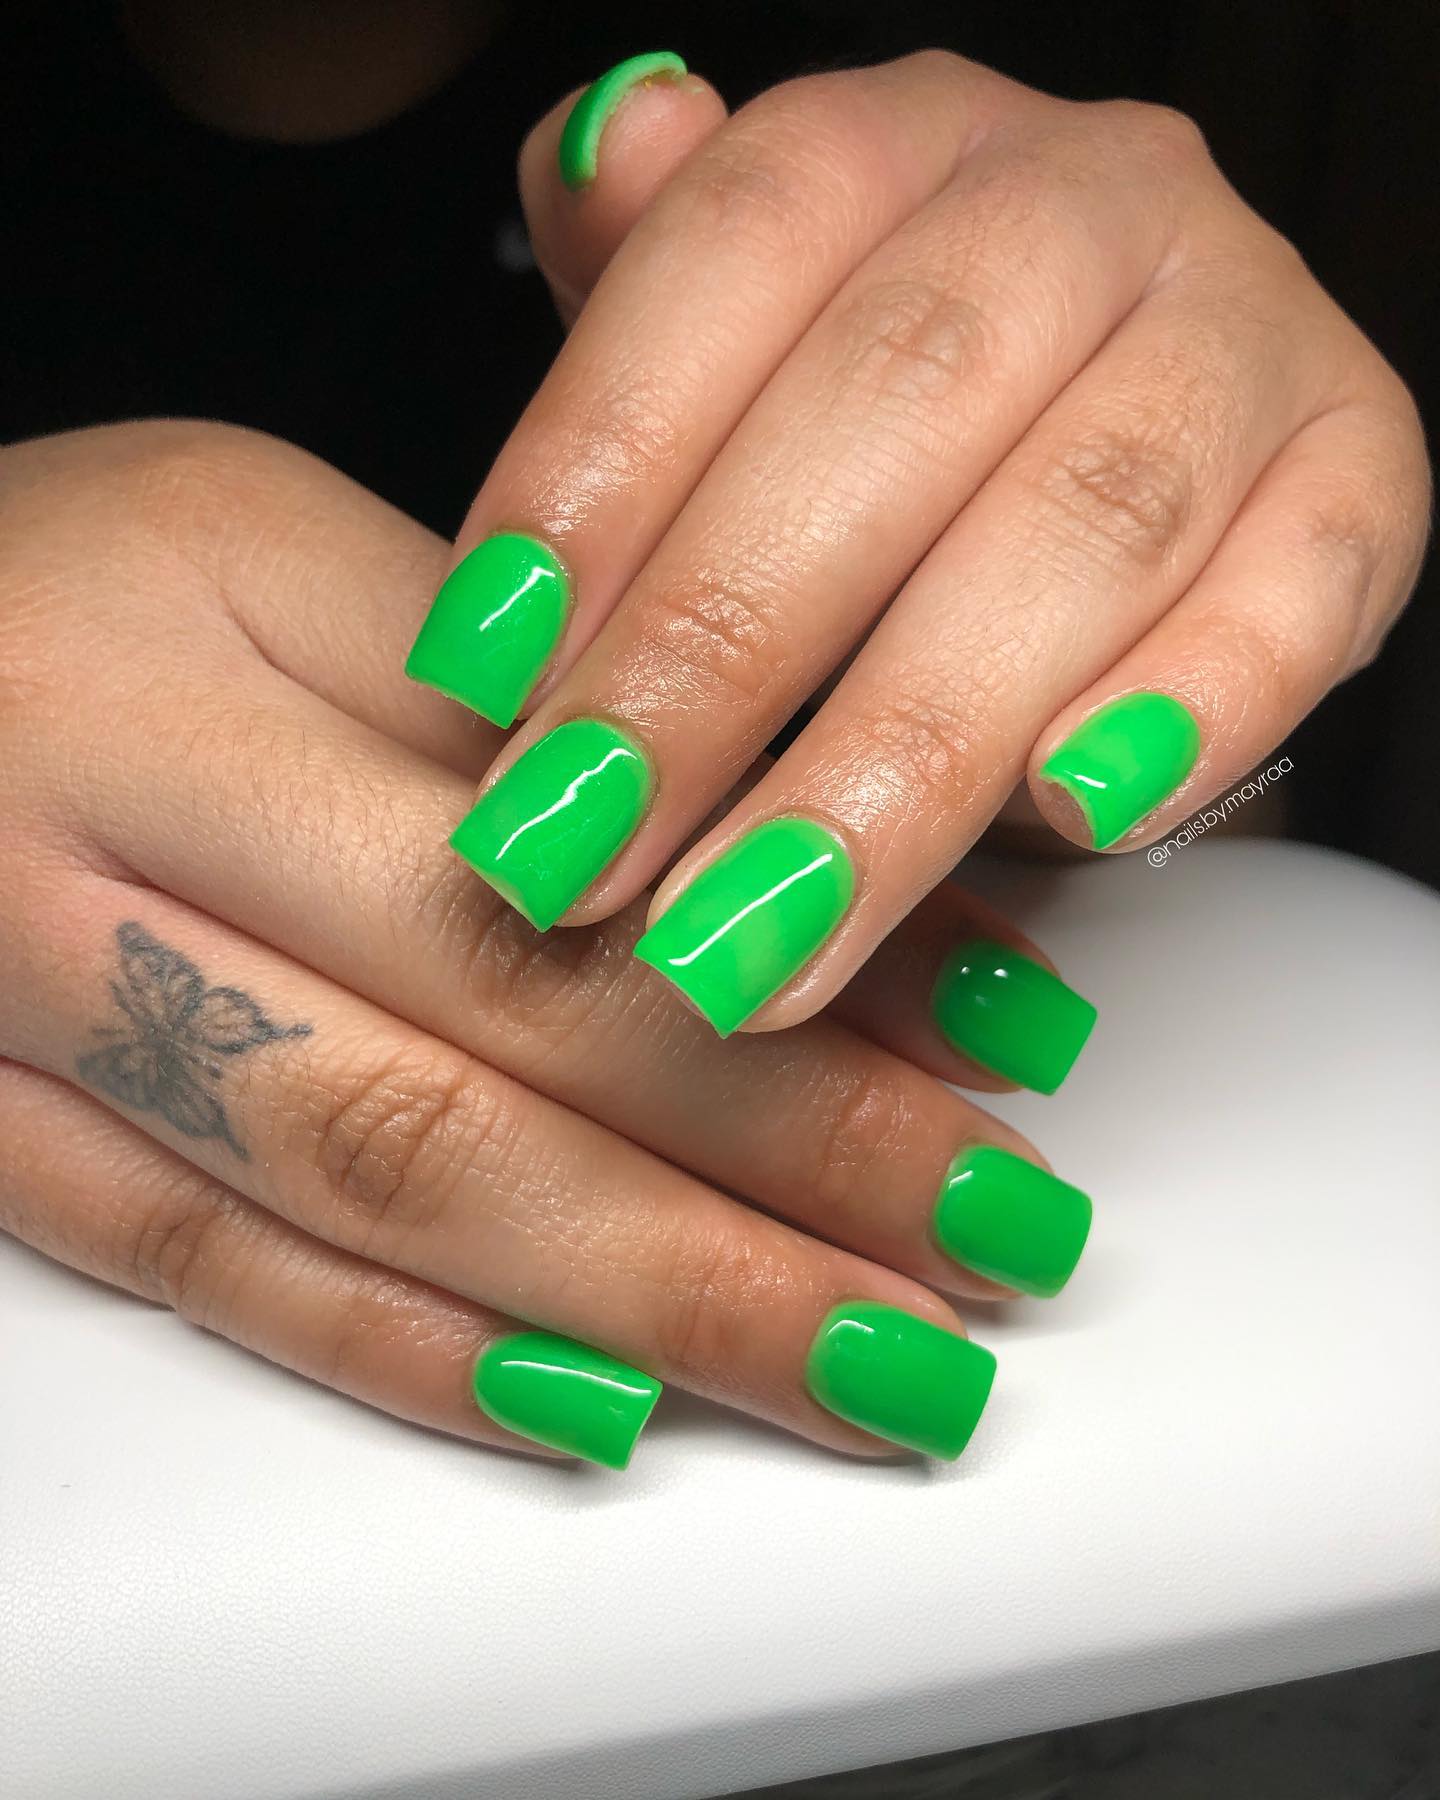 If you like neon green color but don't want to wear a super bright one, this shade is awesome.